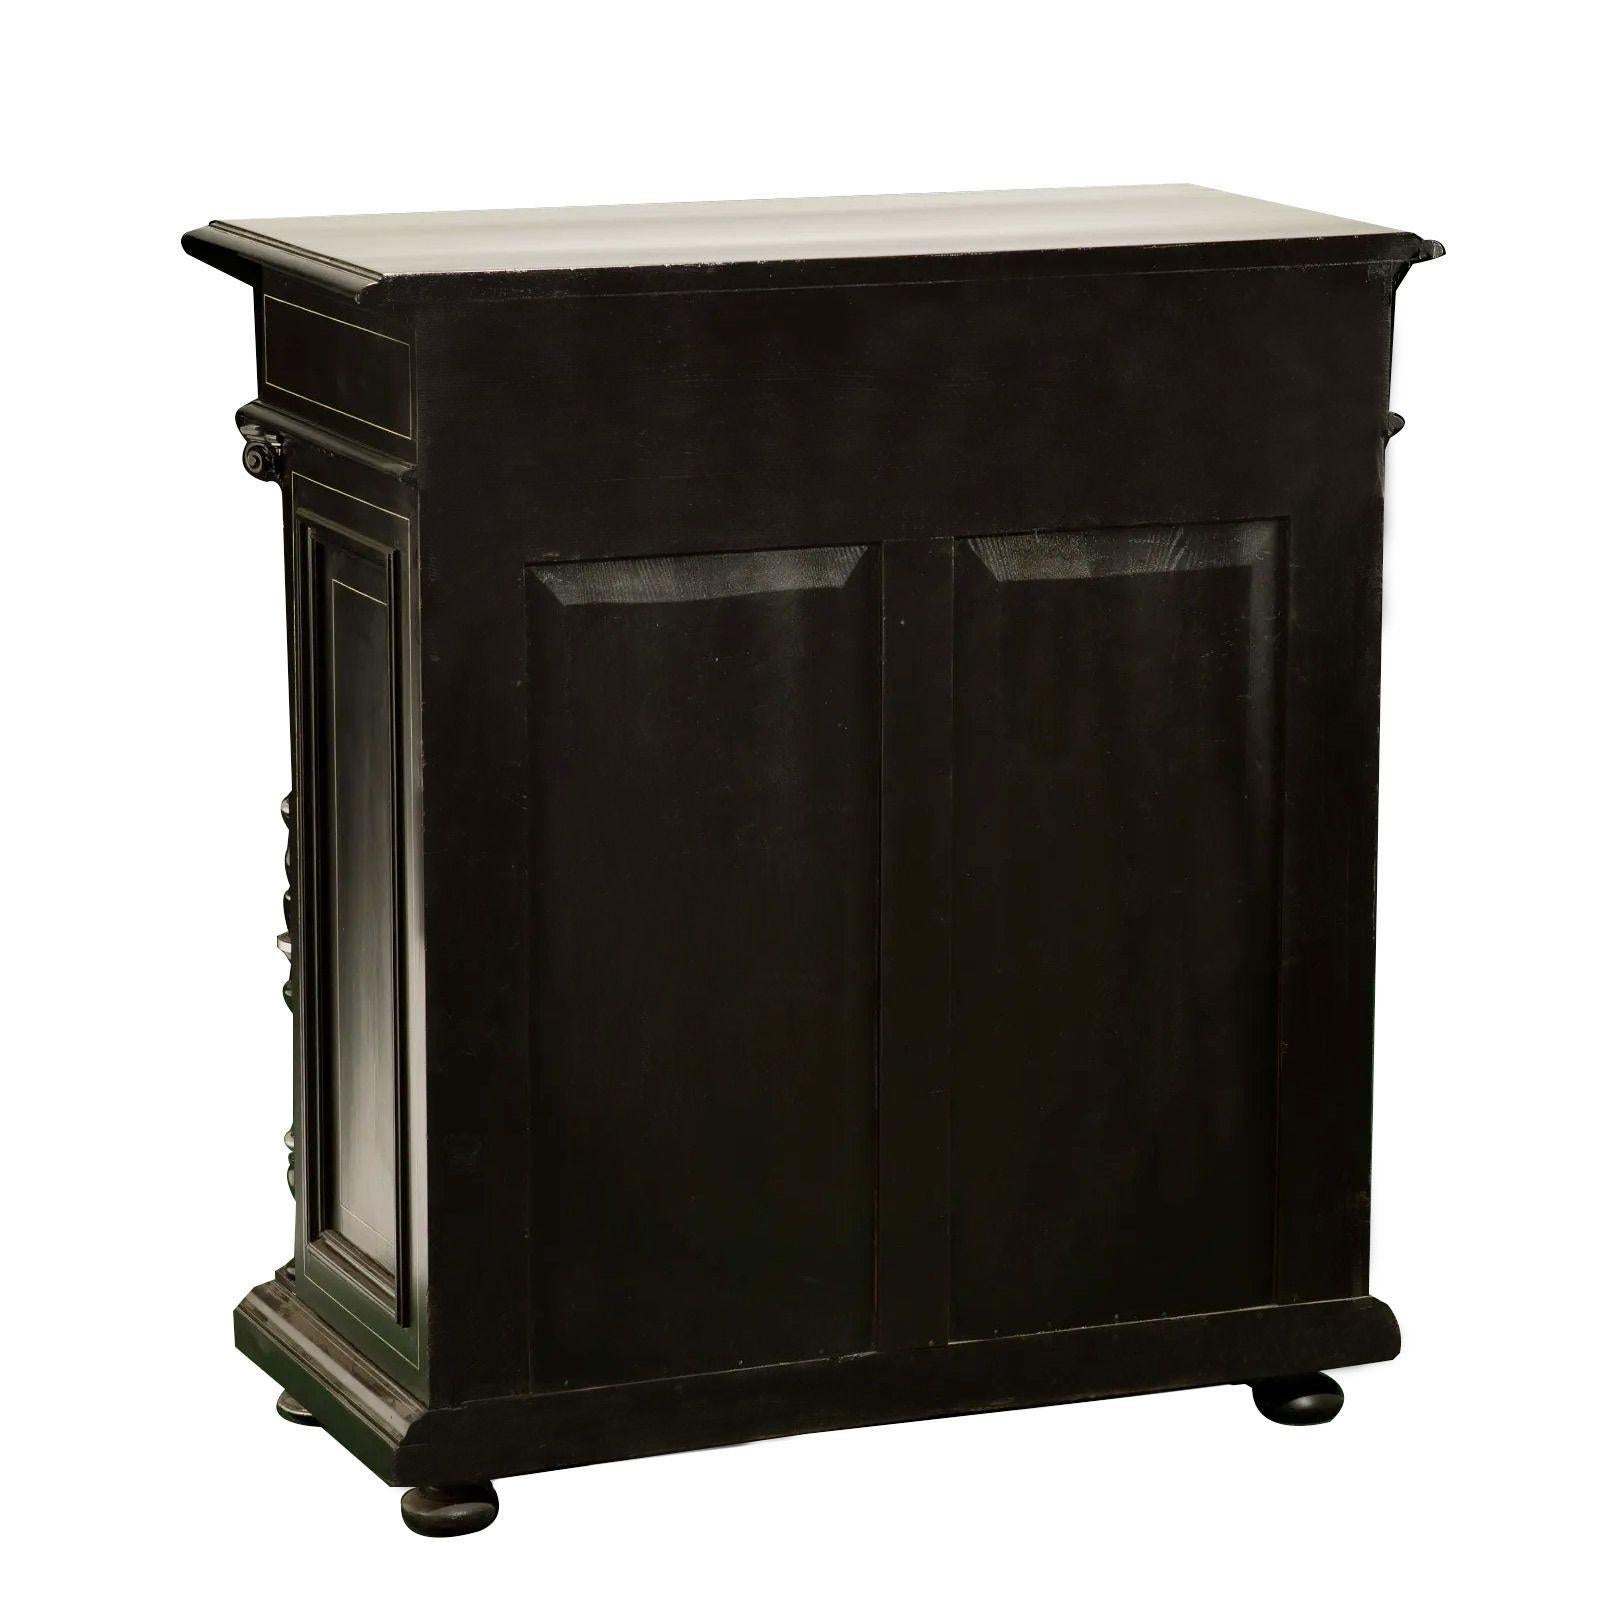 Victorian Renaissance Revival cabinet, Late 19th century

The ebonized body with bone inlay of figural winged angels and motifs of nature, two upper drawers, and a double-door cabinet flanked by Corinthian columns on bun feet
